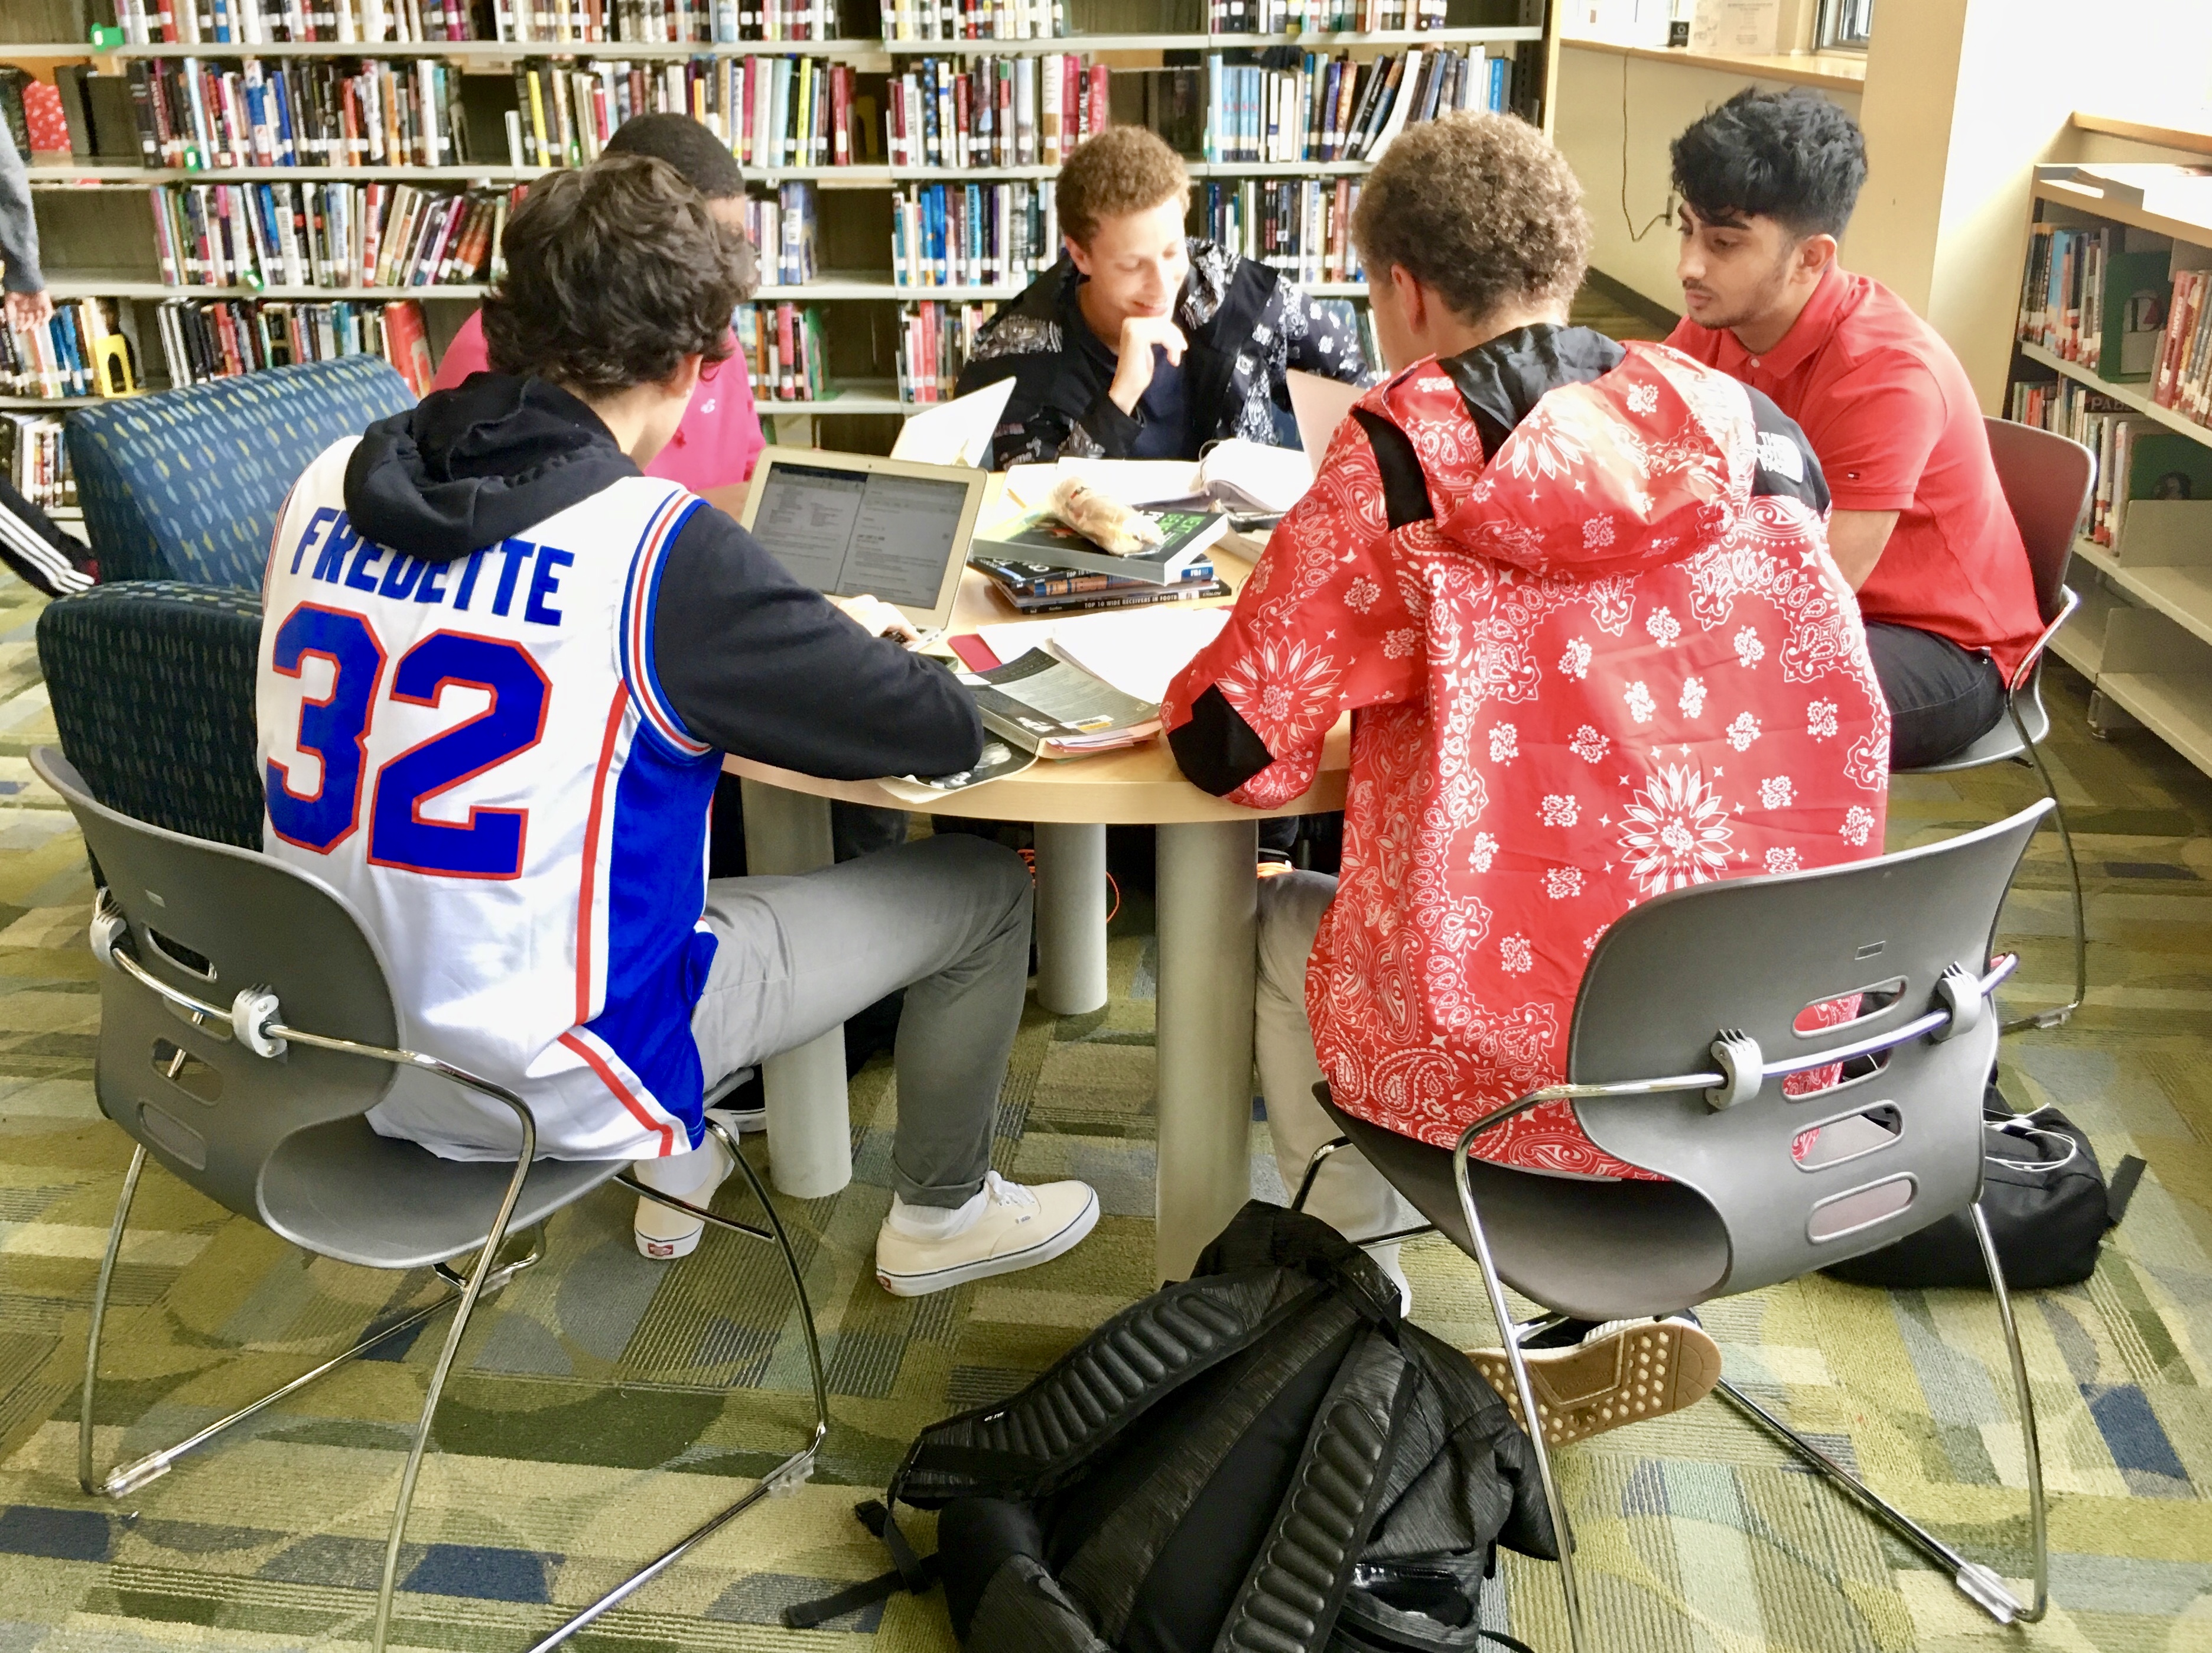 Rigor - Students in the library